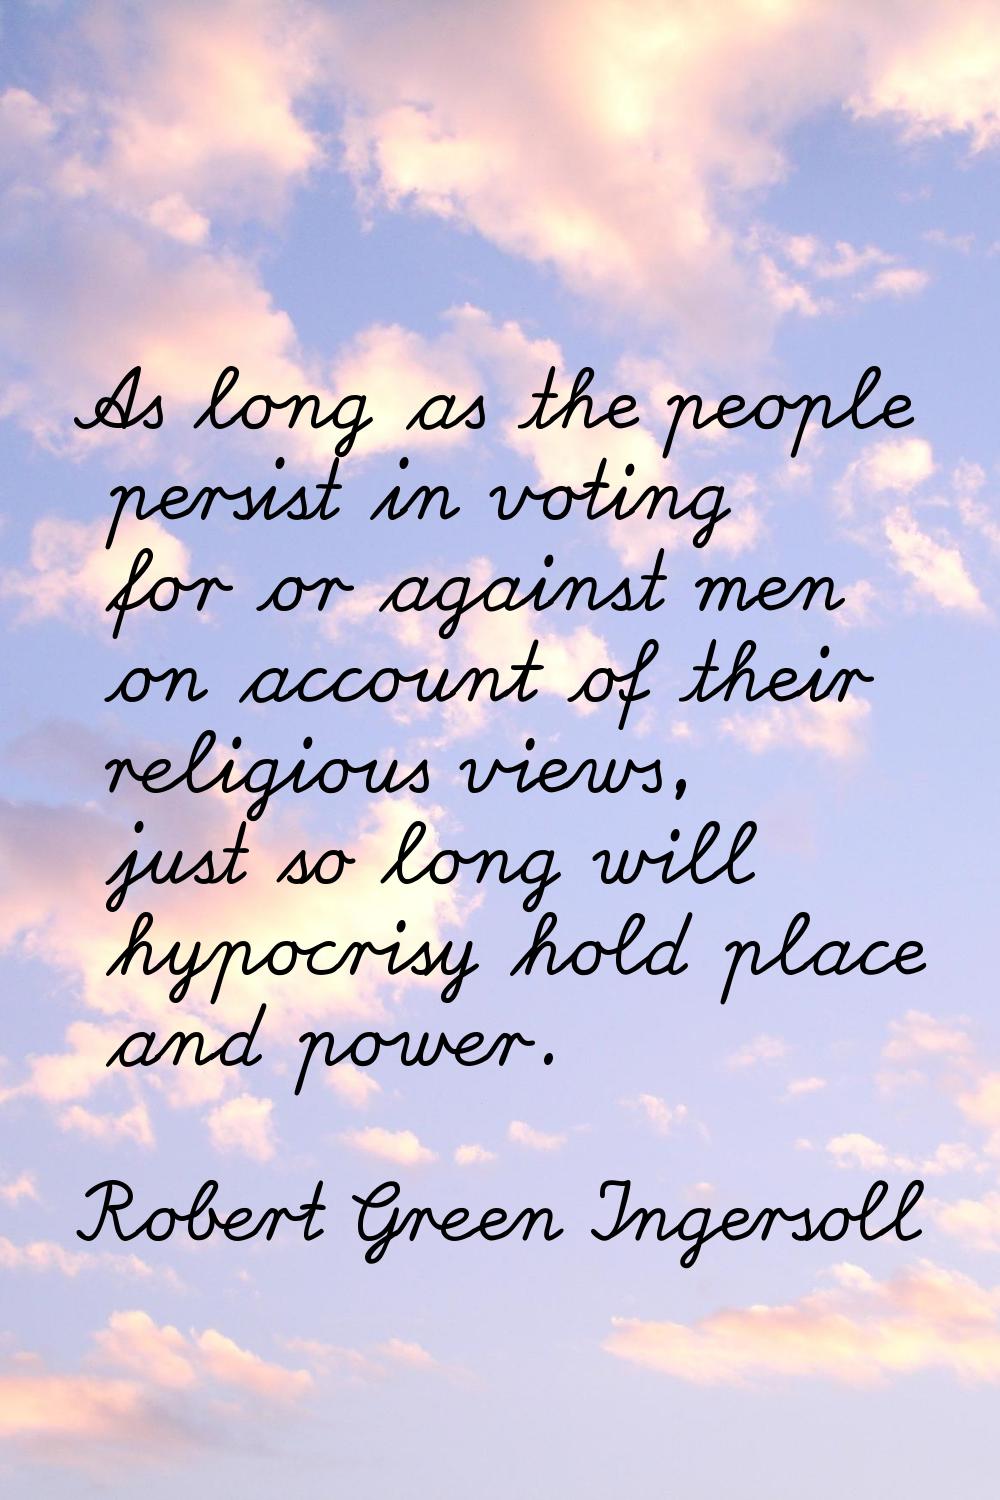 As long as the people persist in voting for or against men on account of their religious views, jus